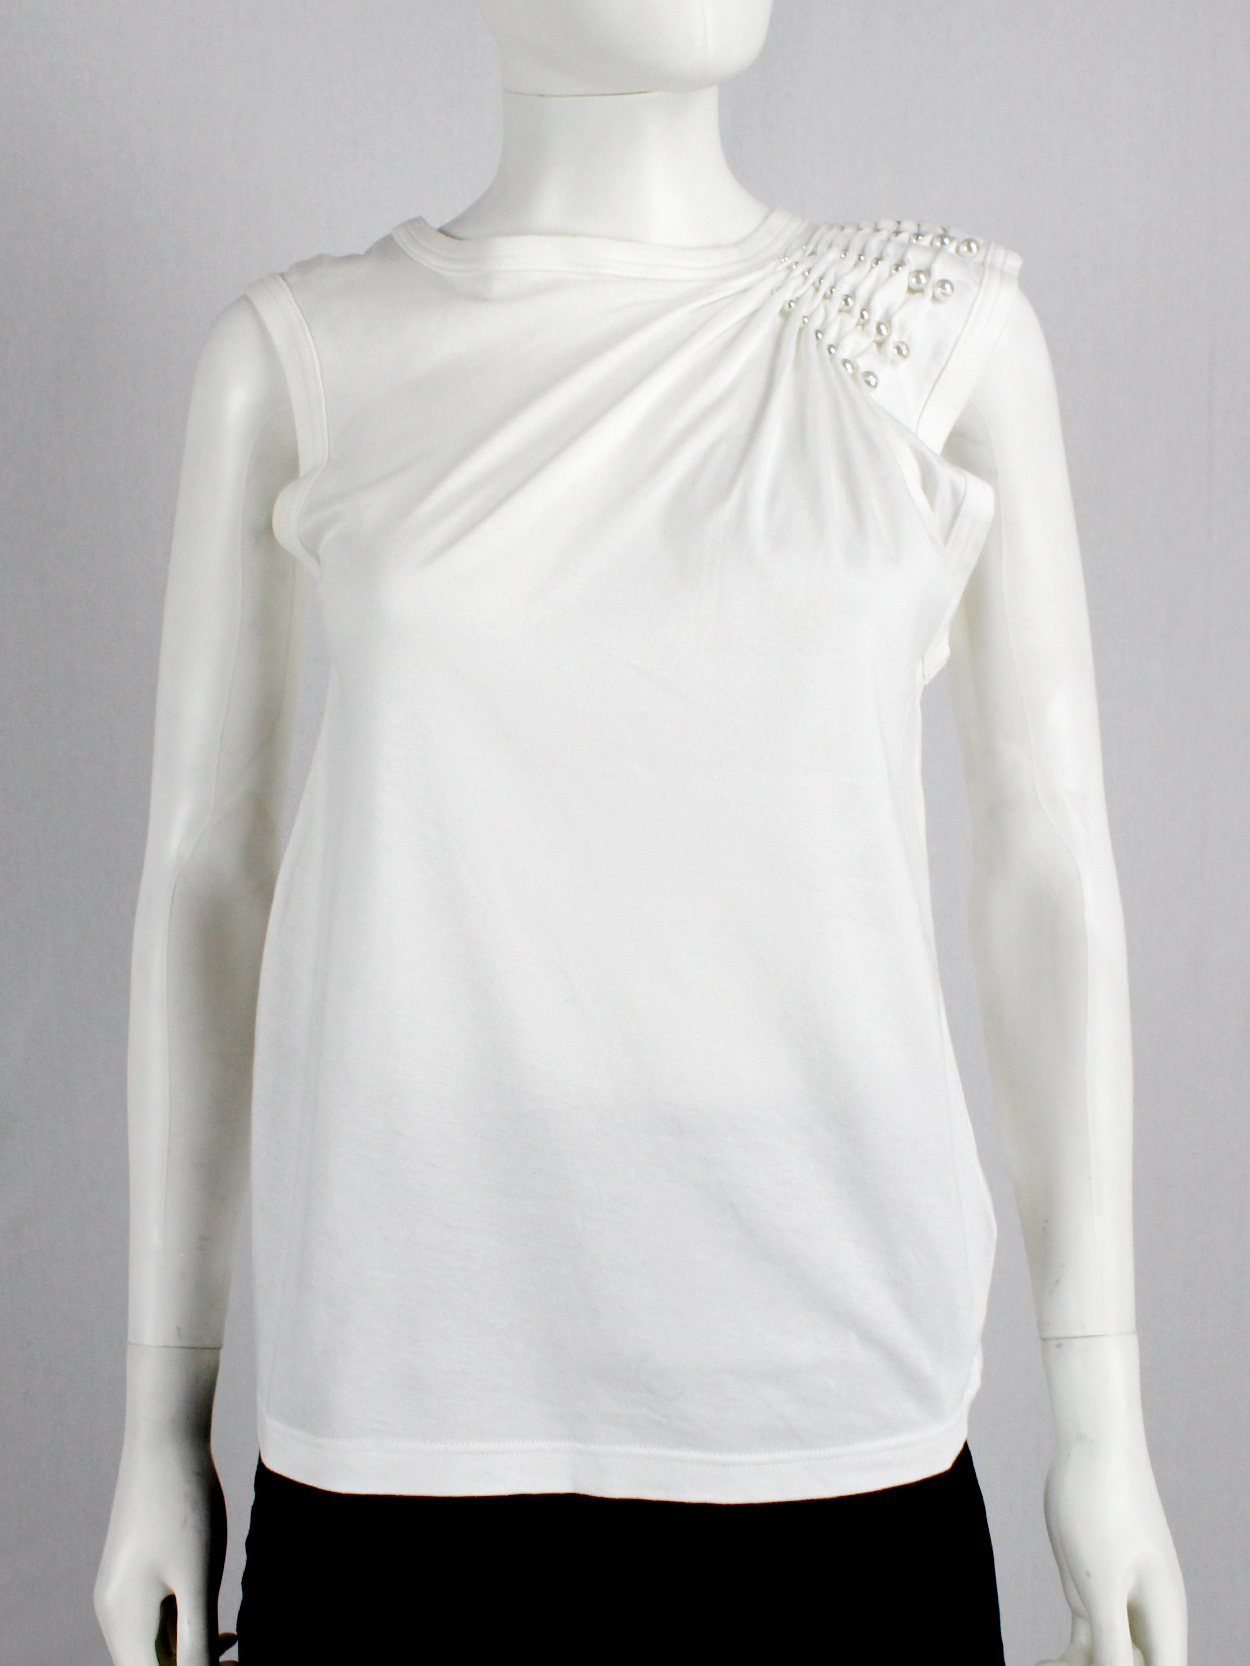 Noir Kei Ninomiya white top with the shoulder gathered by rows of ...